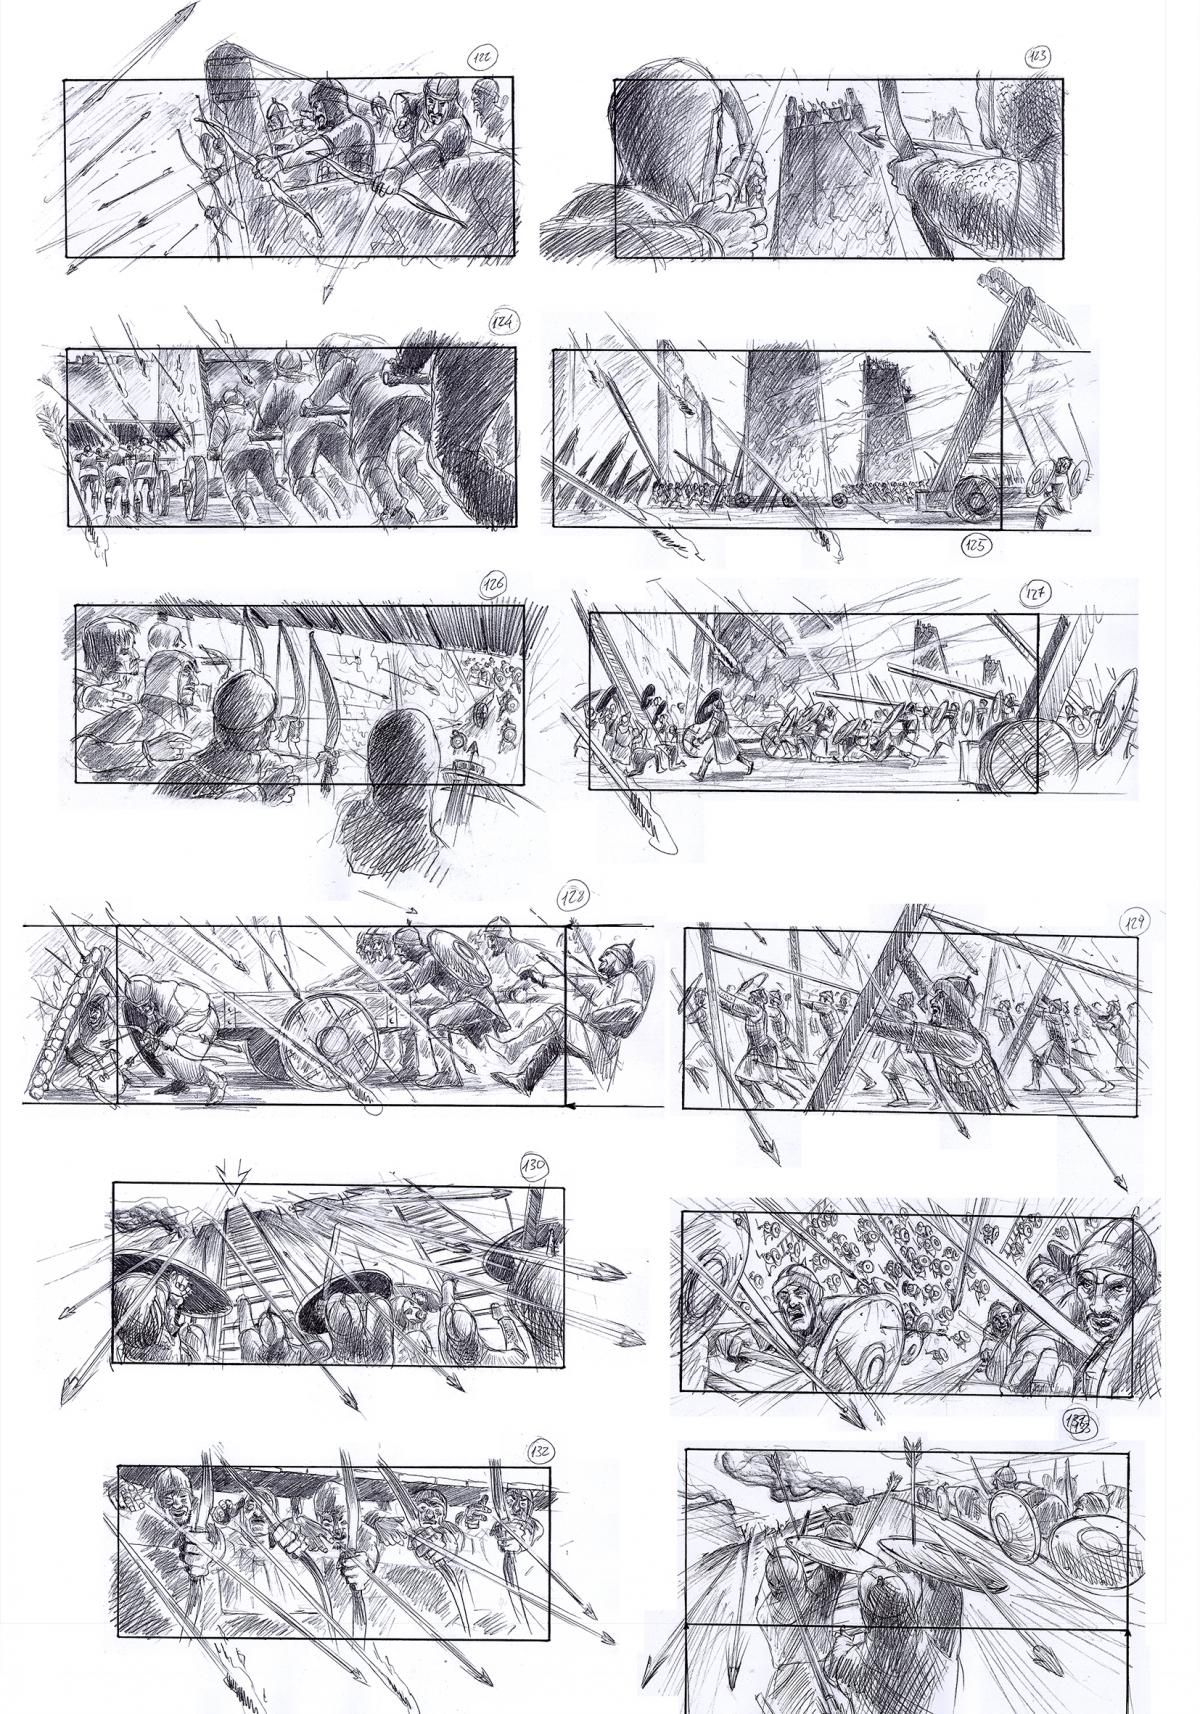 12 black and white drawings in a 2 column grid depicting soldiers shooting arrows and the chaos of battle